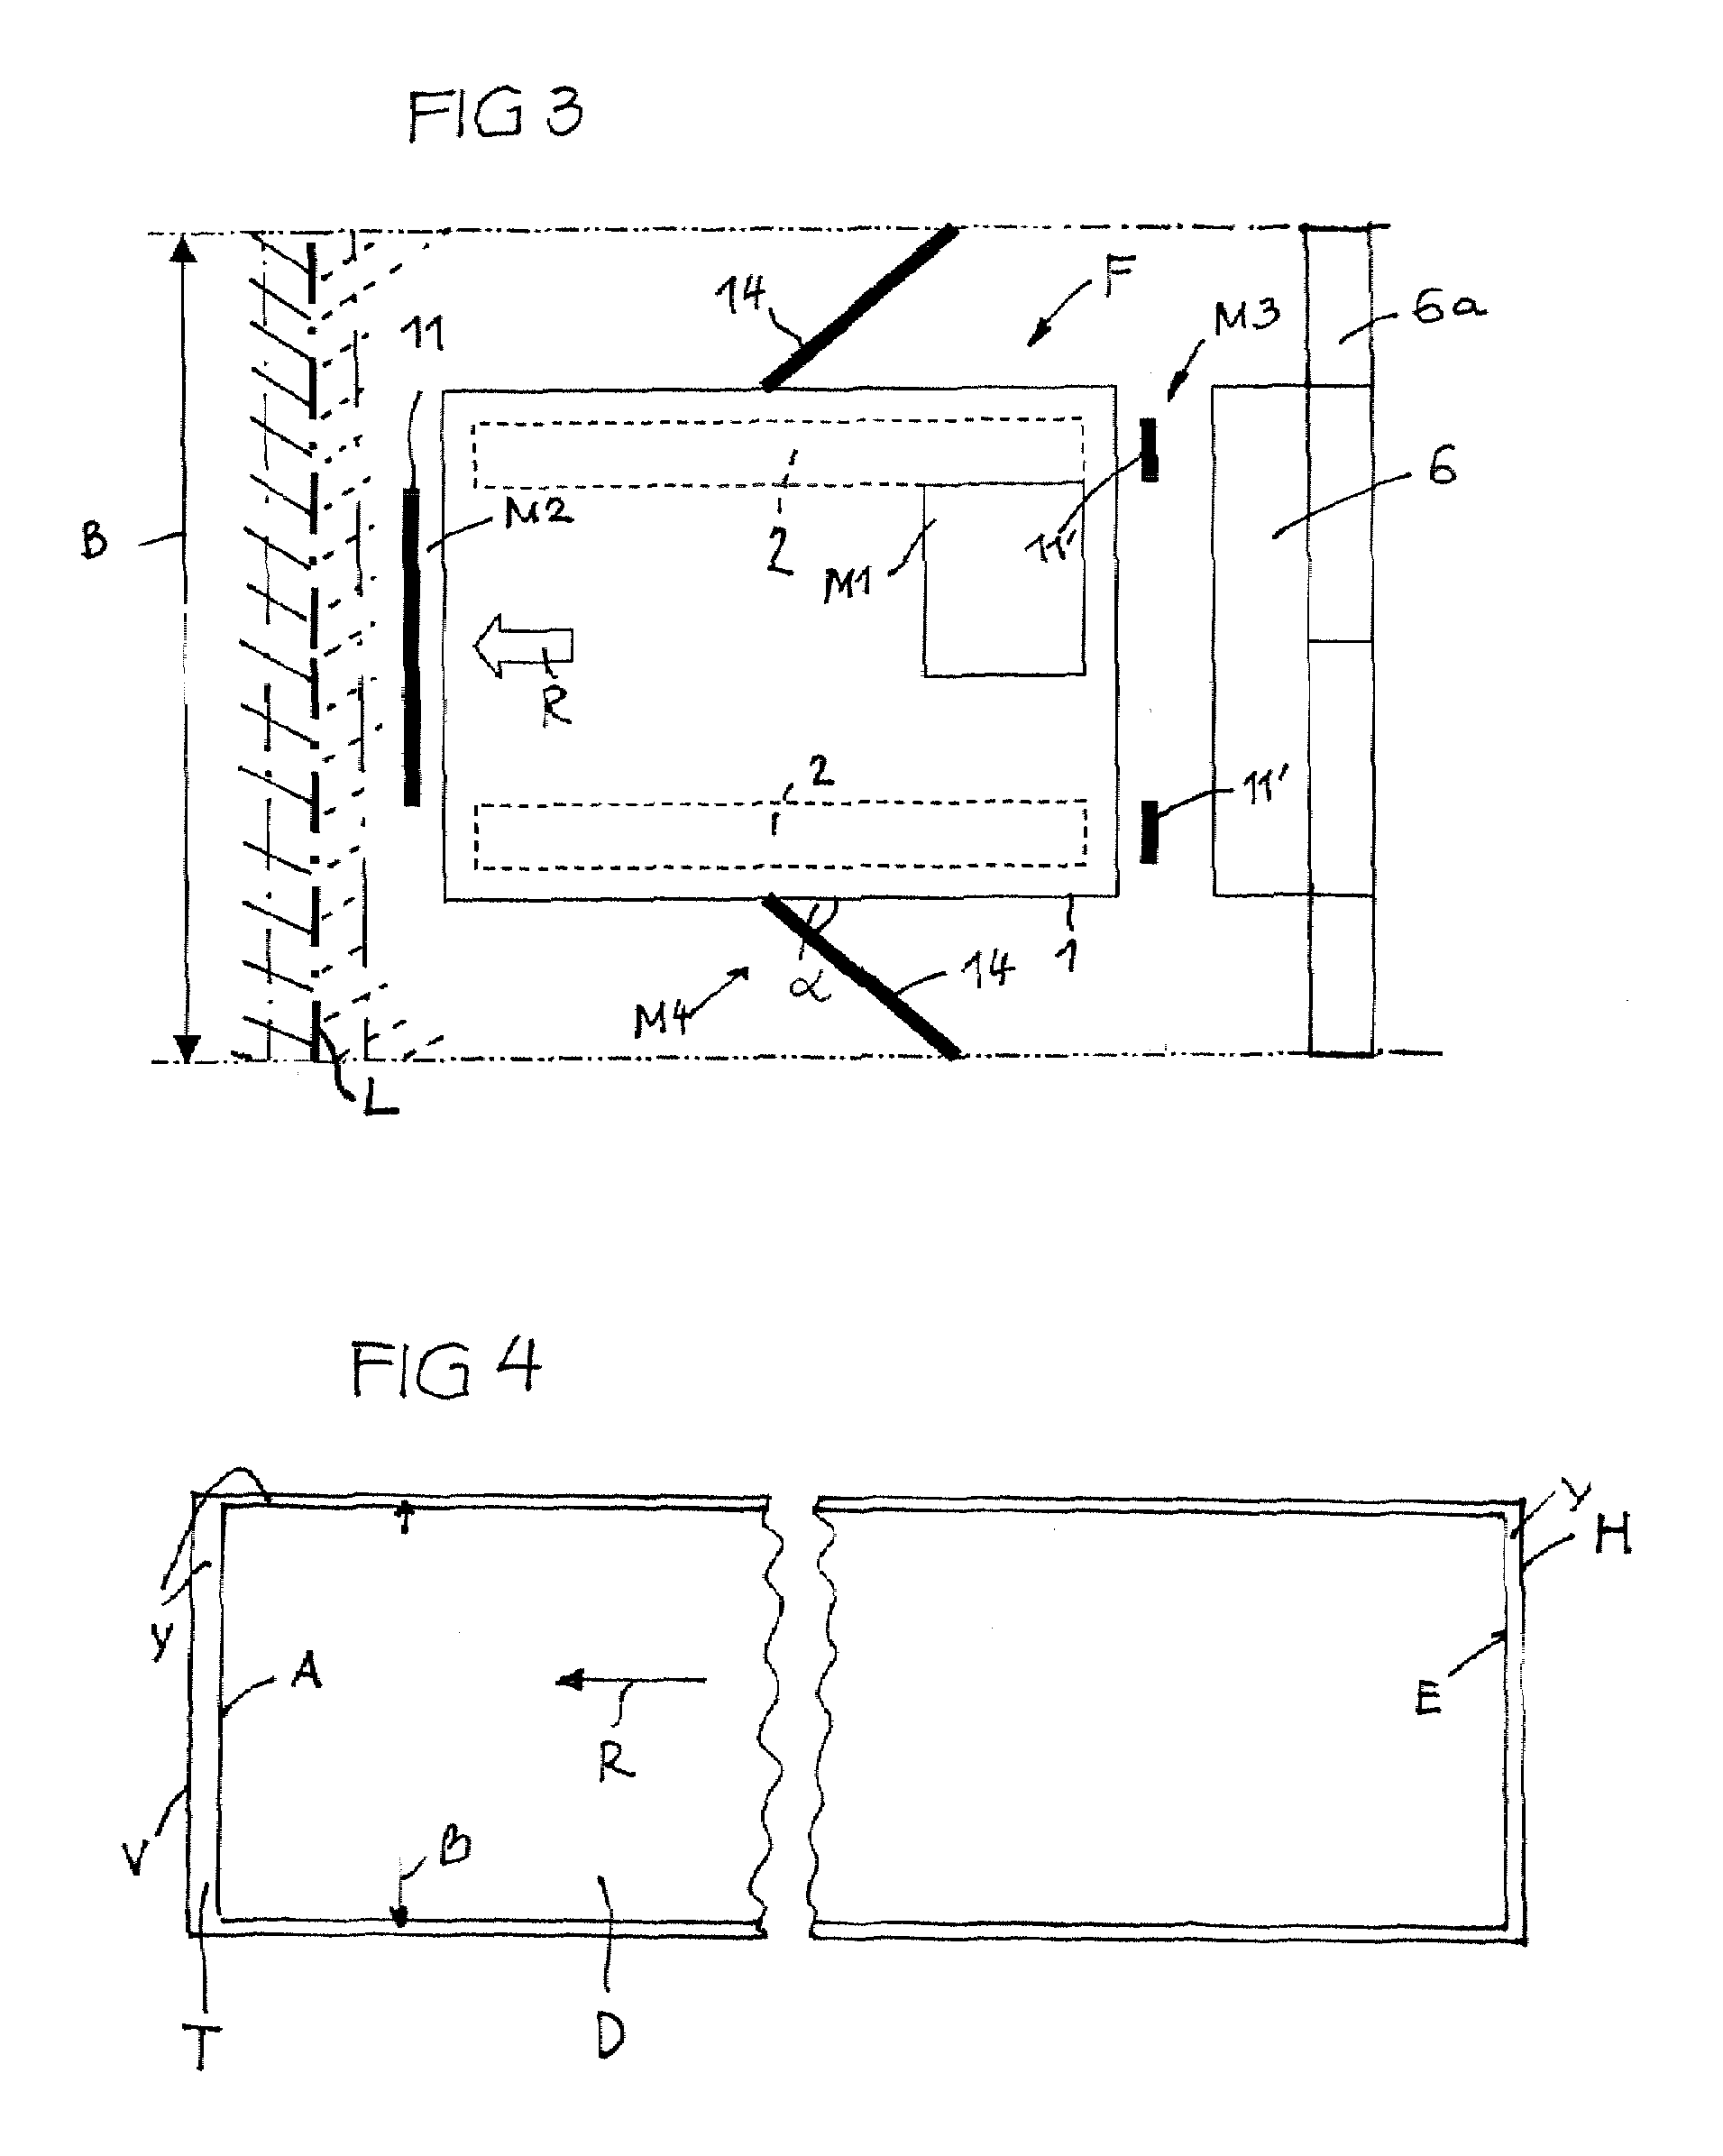 Method for producing a continuous bonding agent carpet and road finisher